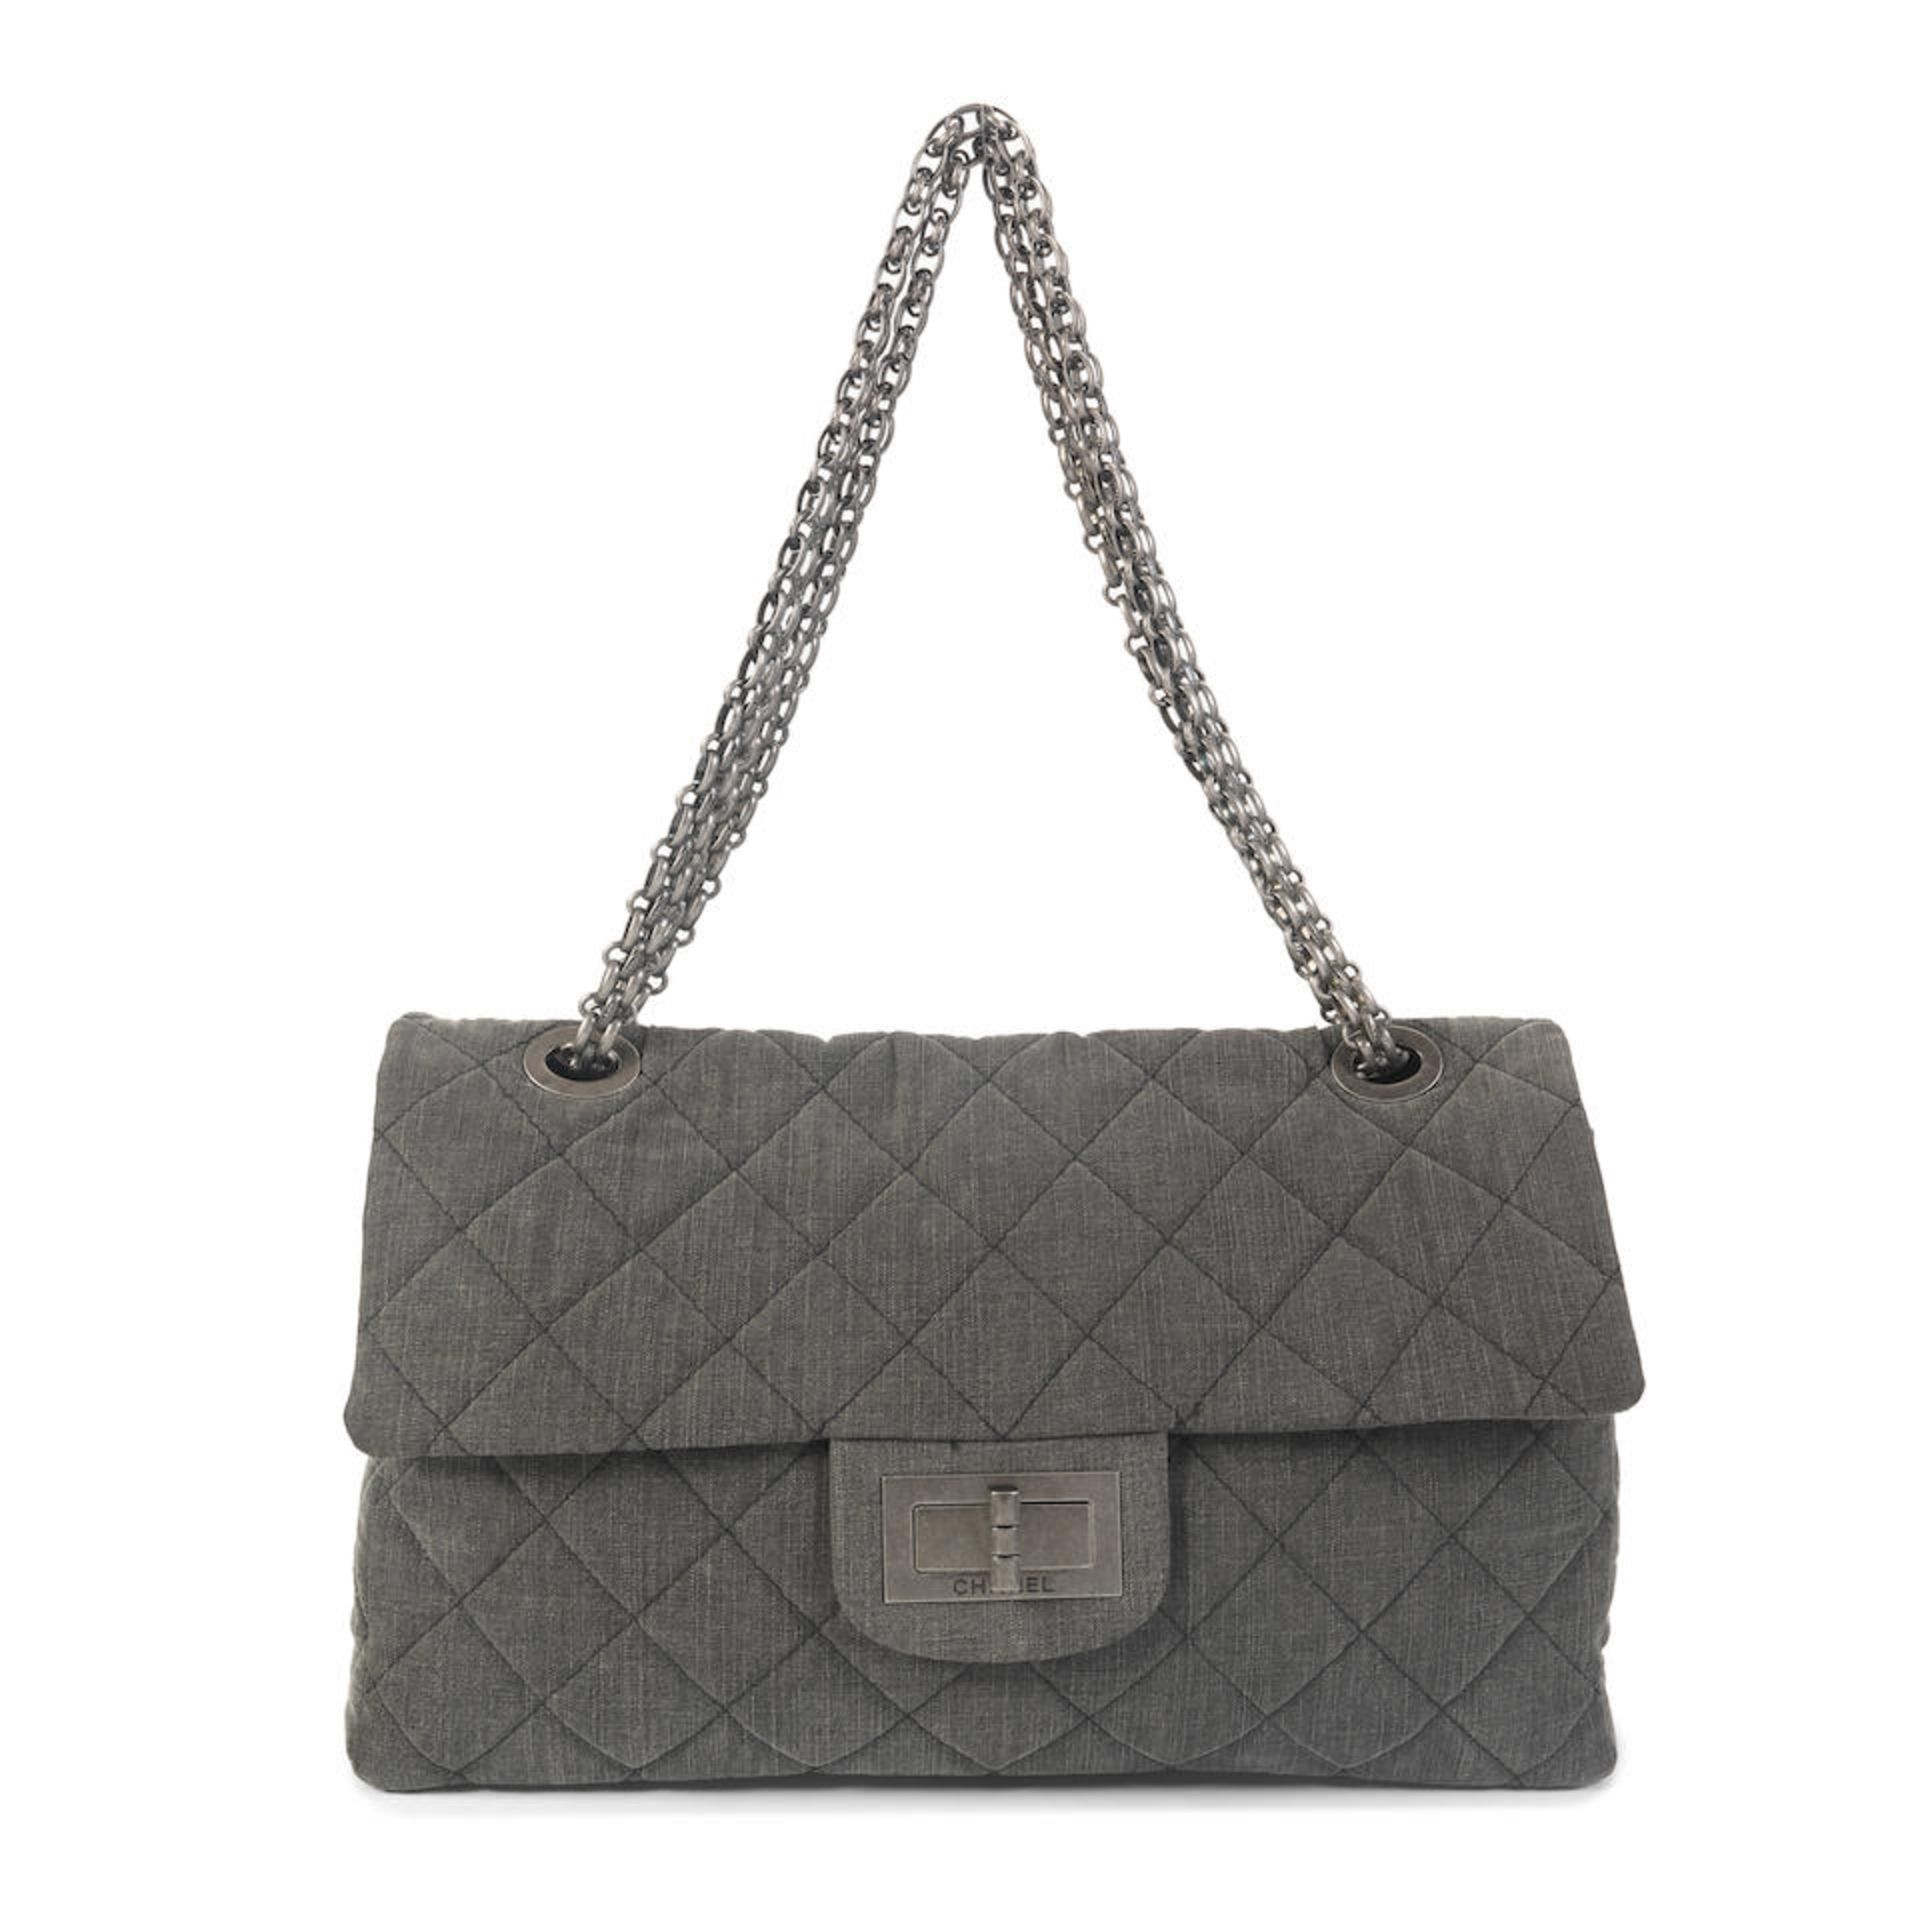 Karl Lagerfeld for Chanel: a Grey Denim XXL Reissue Airline Travel Flap Bag 2009-10 (includes se...